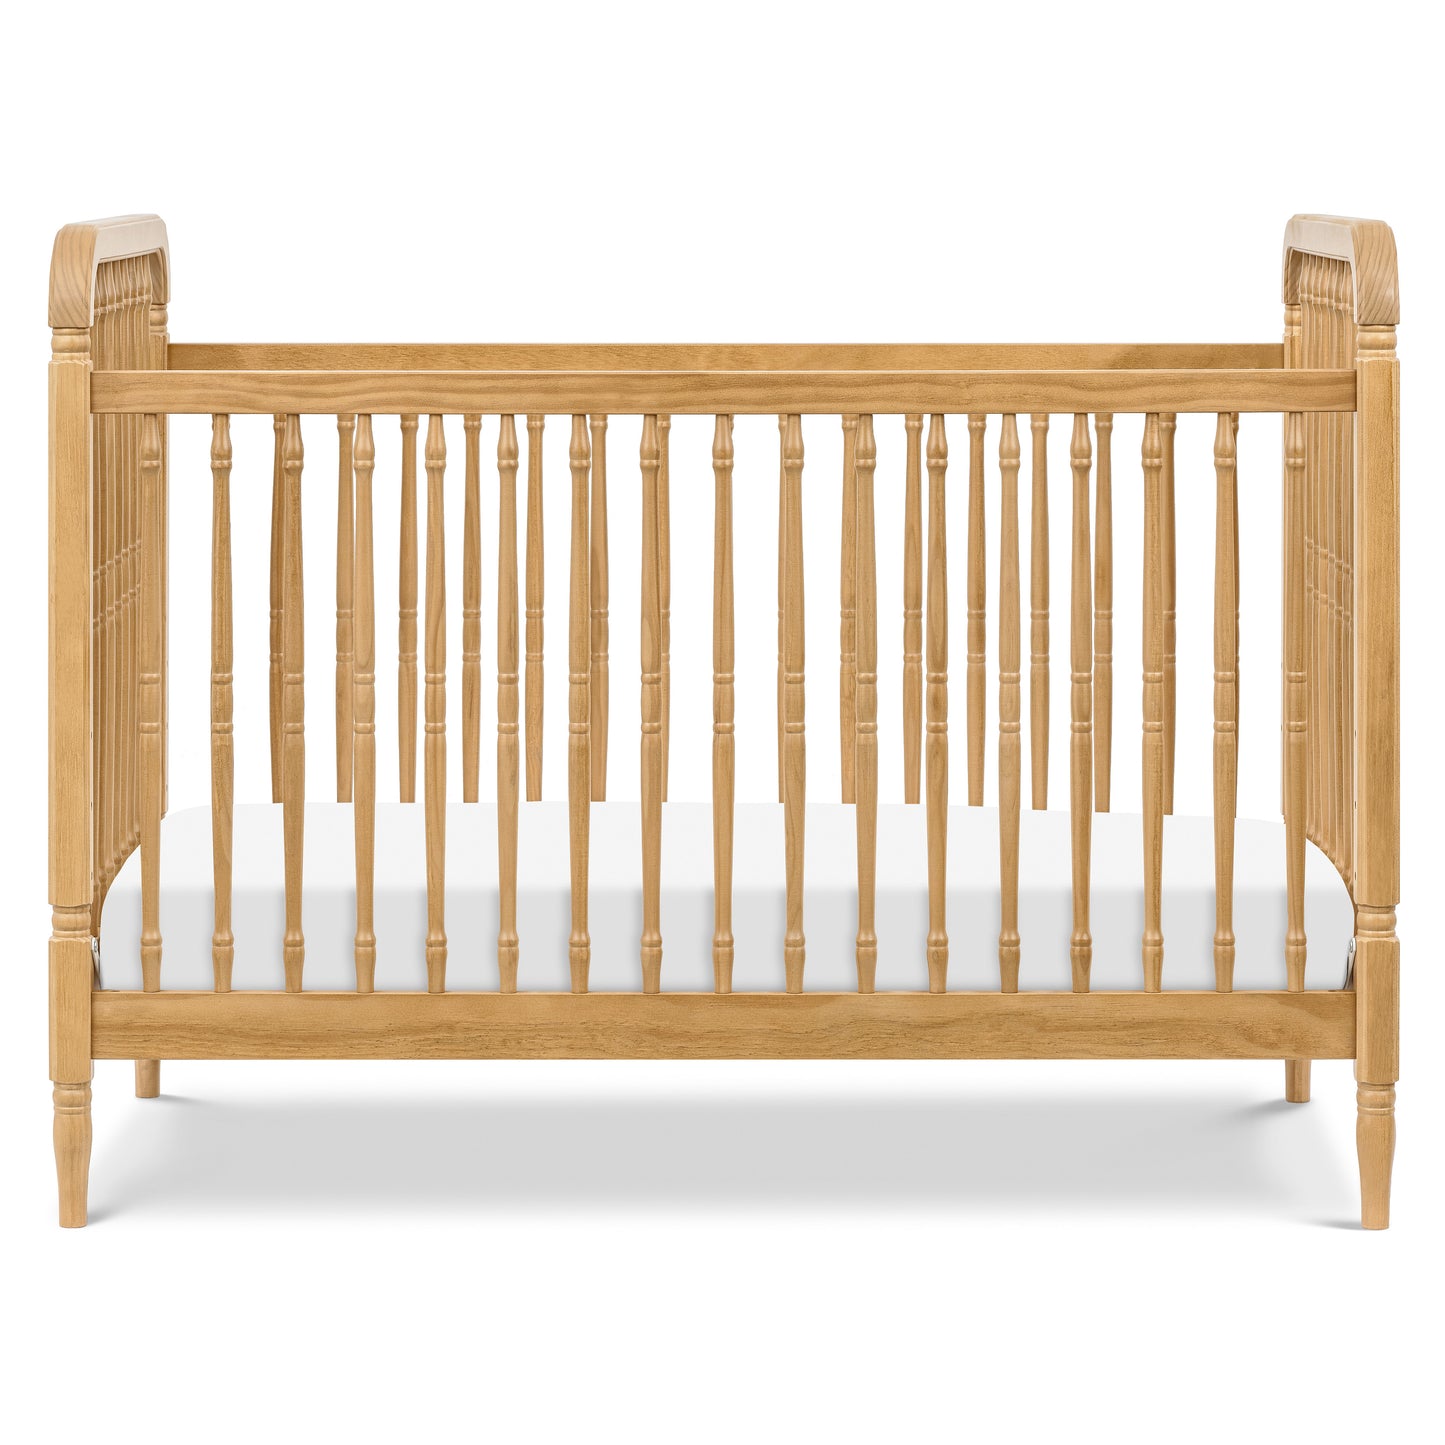 M7101HY,Liberty 3-in-1 Convertible Spindle Crib w/Toddler Bed Conversion Kit in Honey